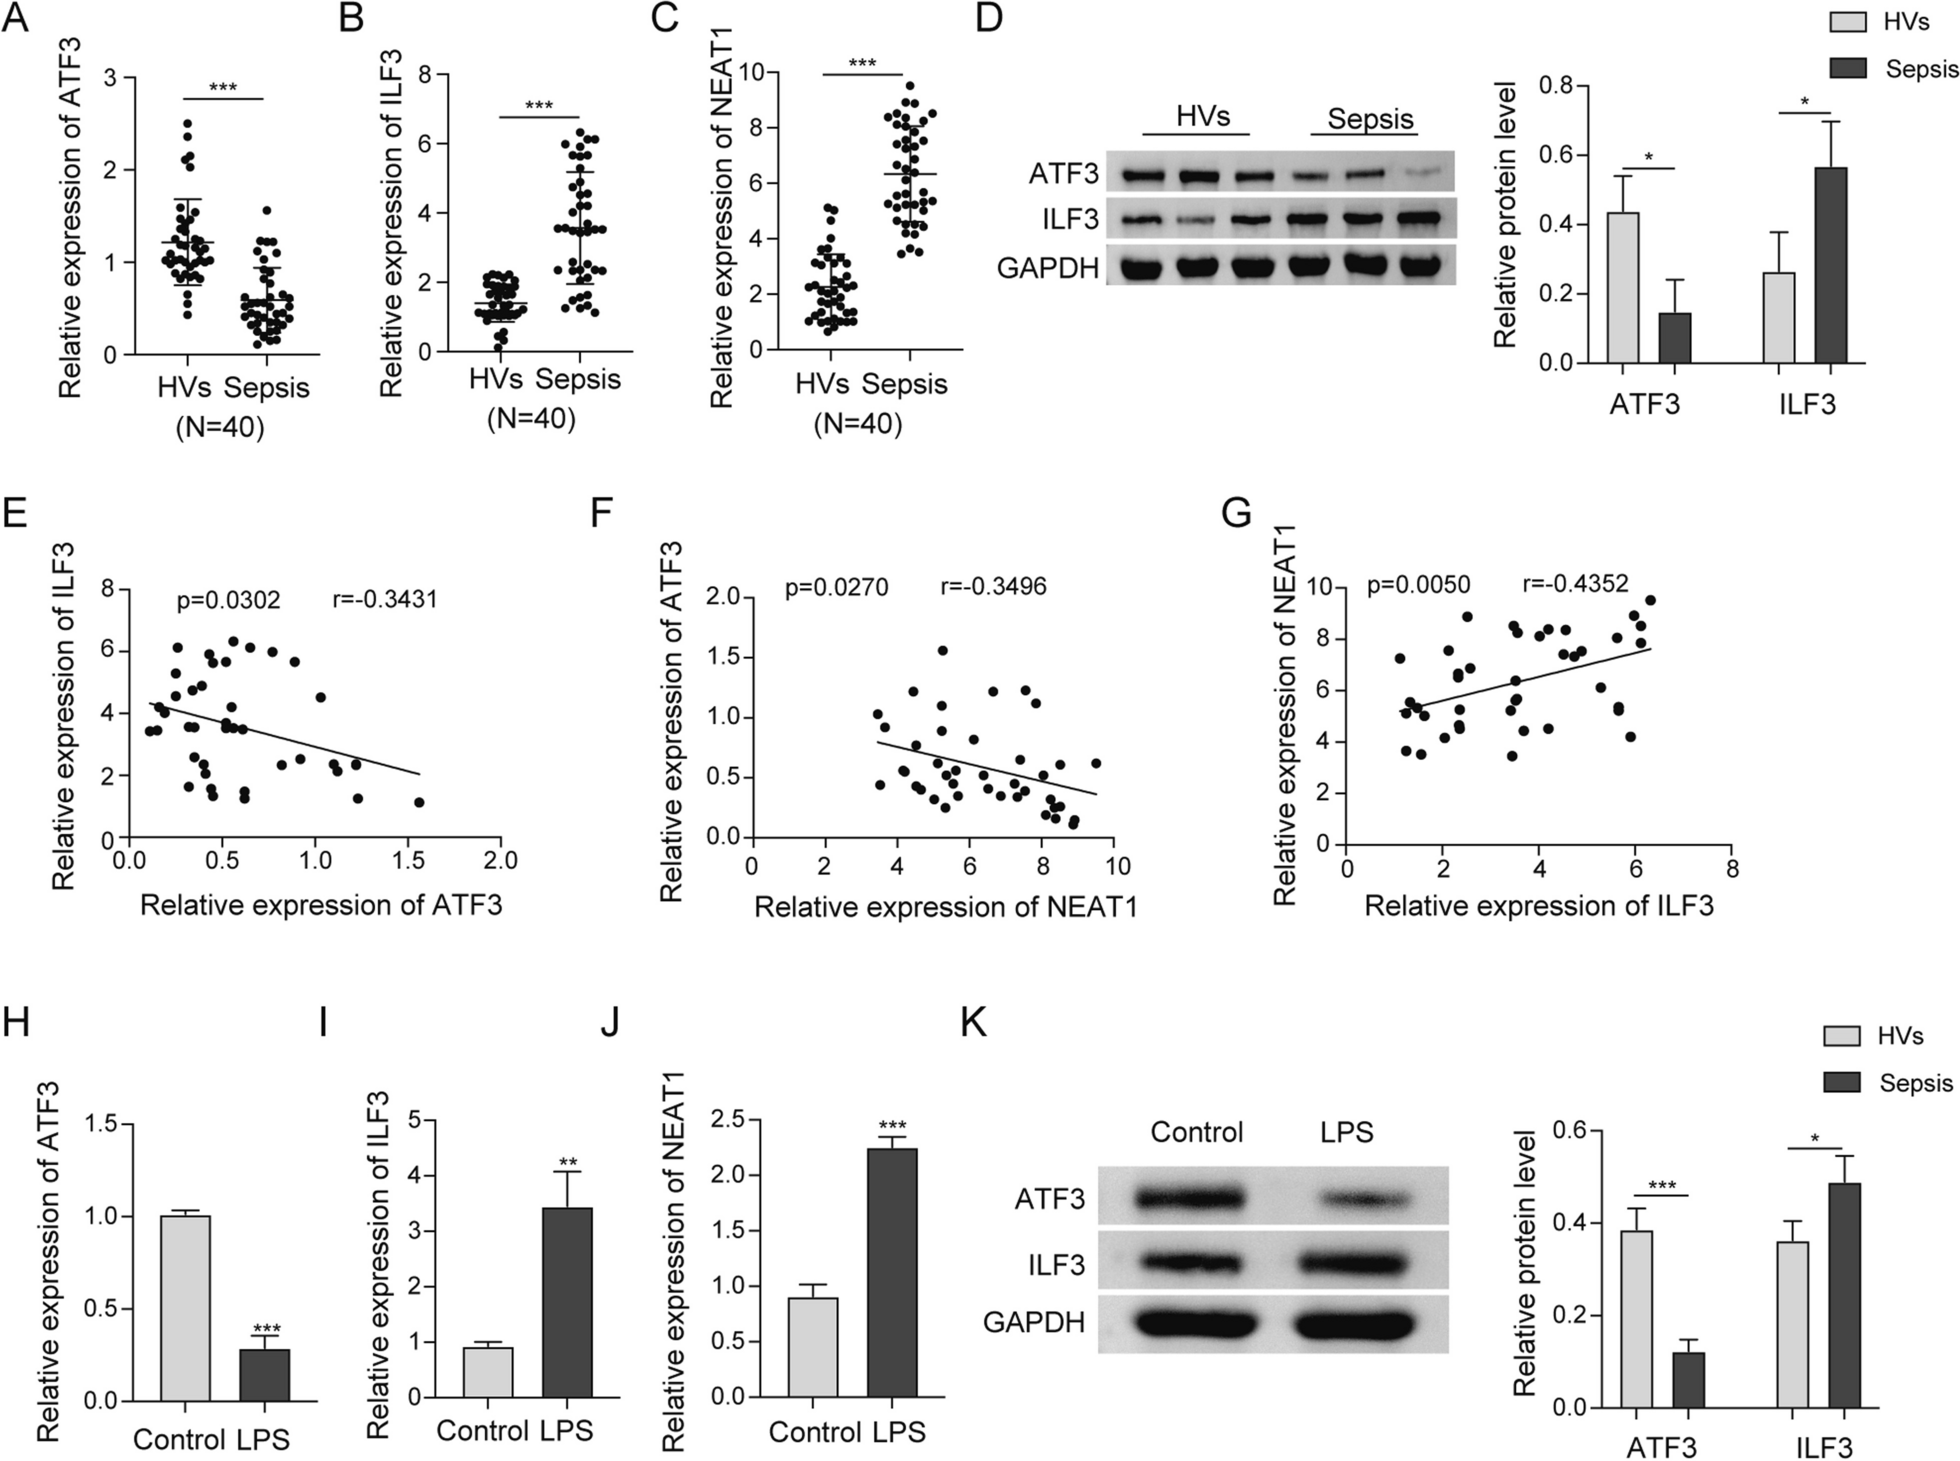 Role of ATF3 triggering M2 macrophage polarization to protect against the inflammatory injury of sepsis through ILF3/NEAT1 axis